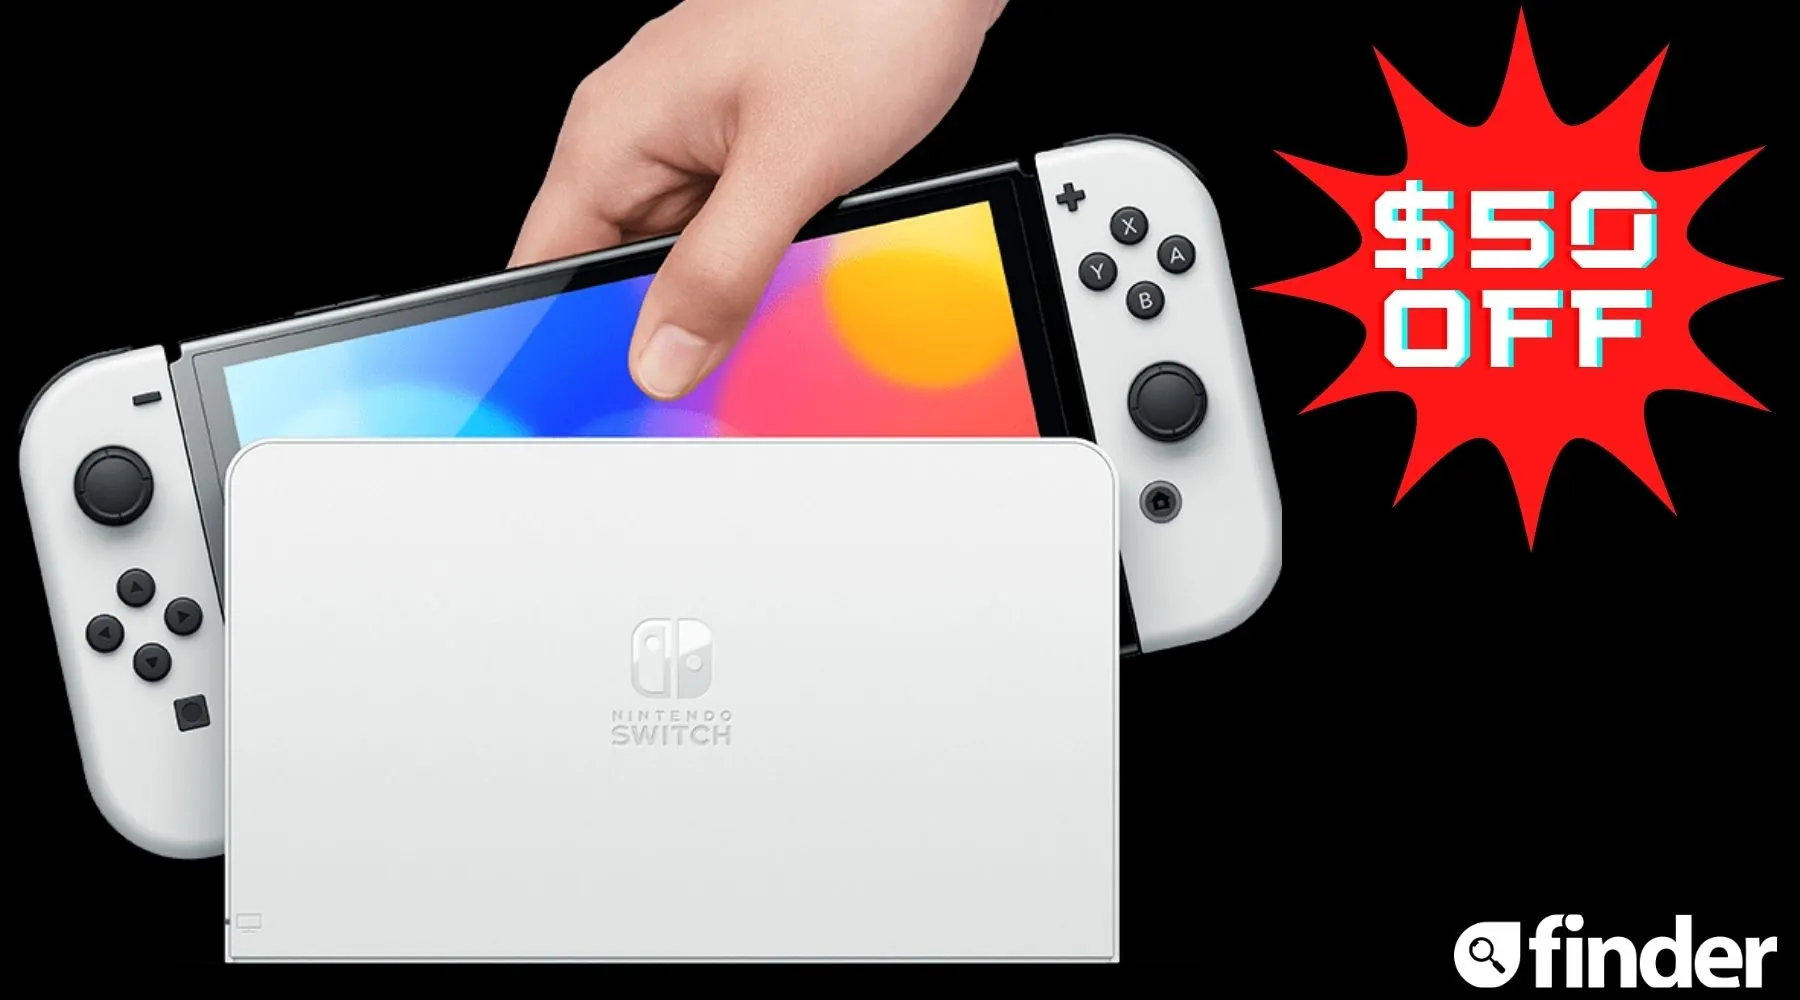 Get $50 off the Nintendo Switch OLED